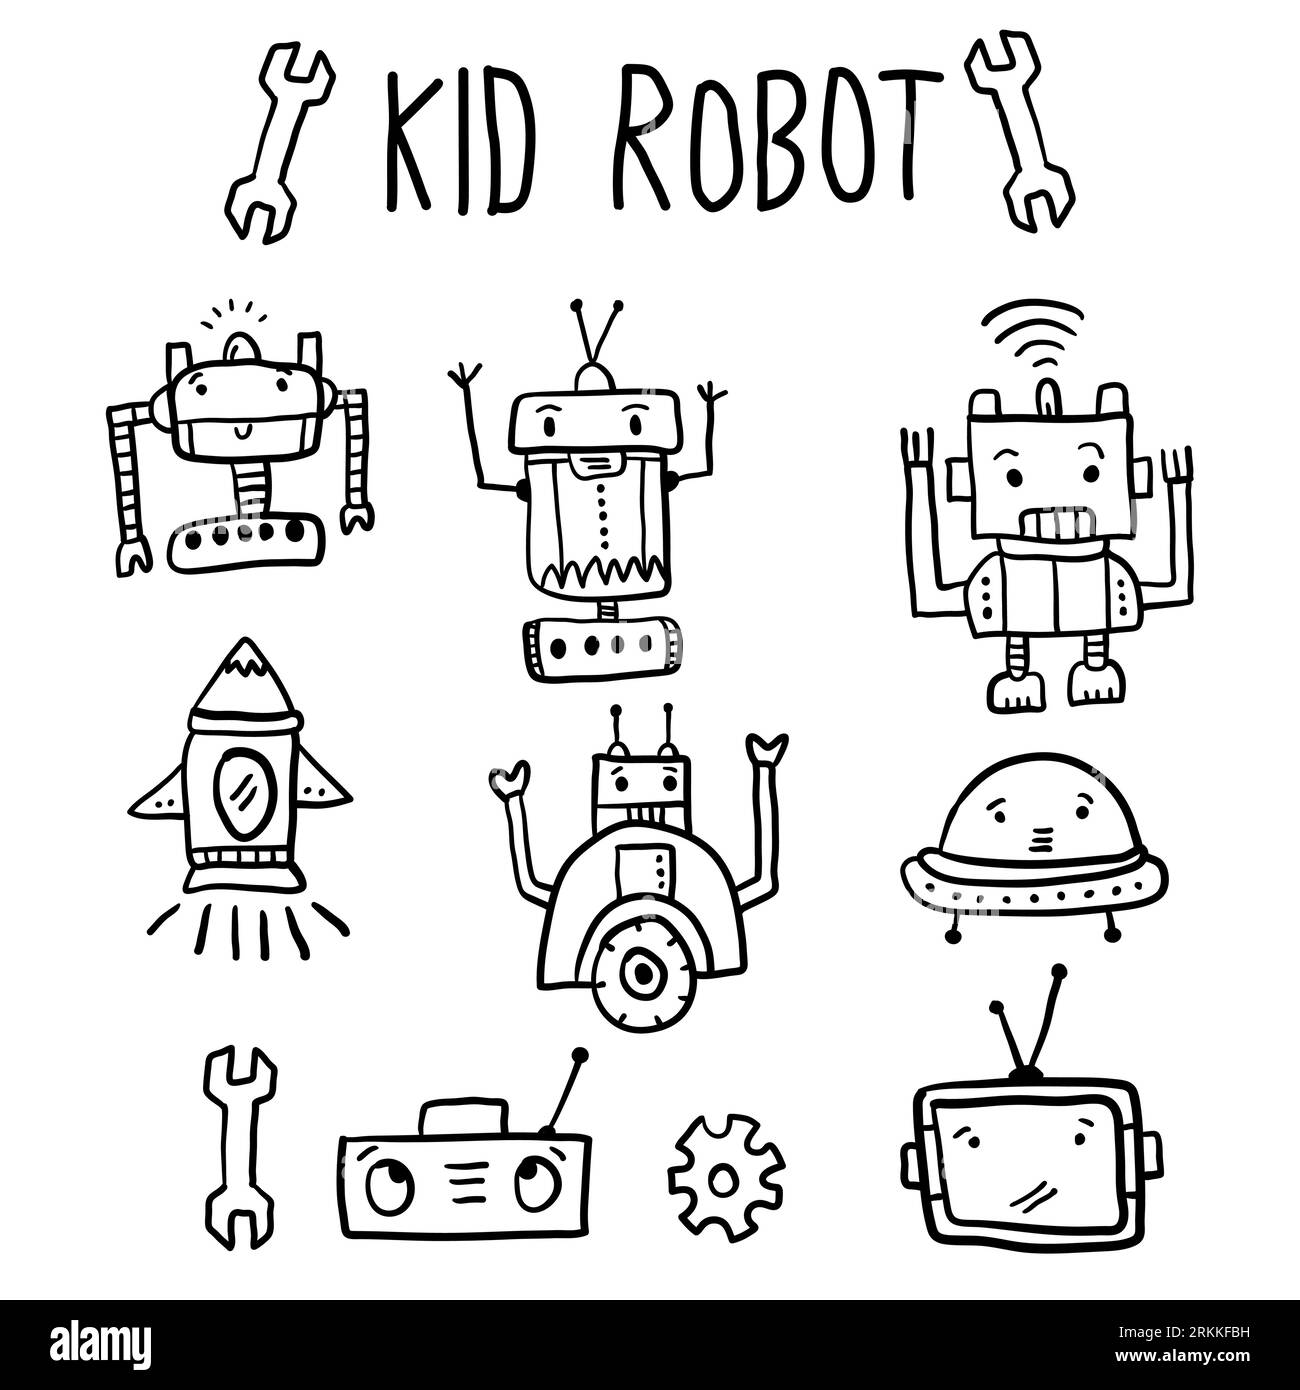 https://c8.alamy.com/comp/2RKKFBH/cute-set-collection-with-childish-robot-and-different-items-funny-drawing-children-robo-cartoon-isolated-on-white-background-old-vintage-kid-toys-sk-2RKKFBH.jpg